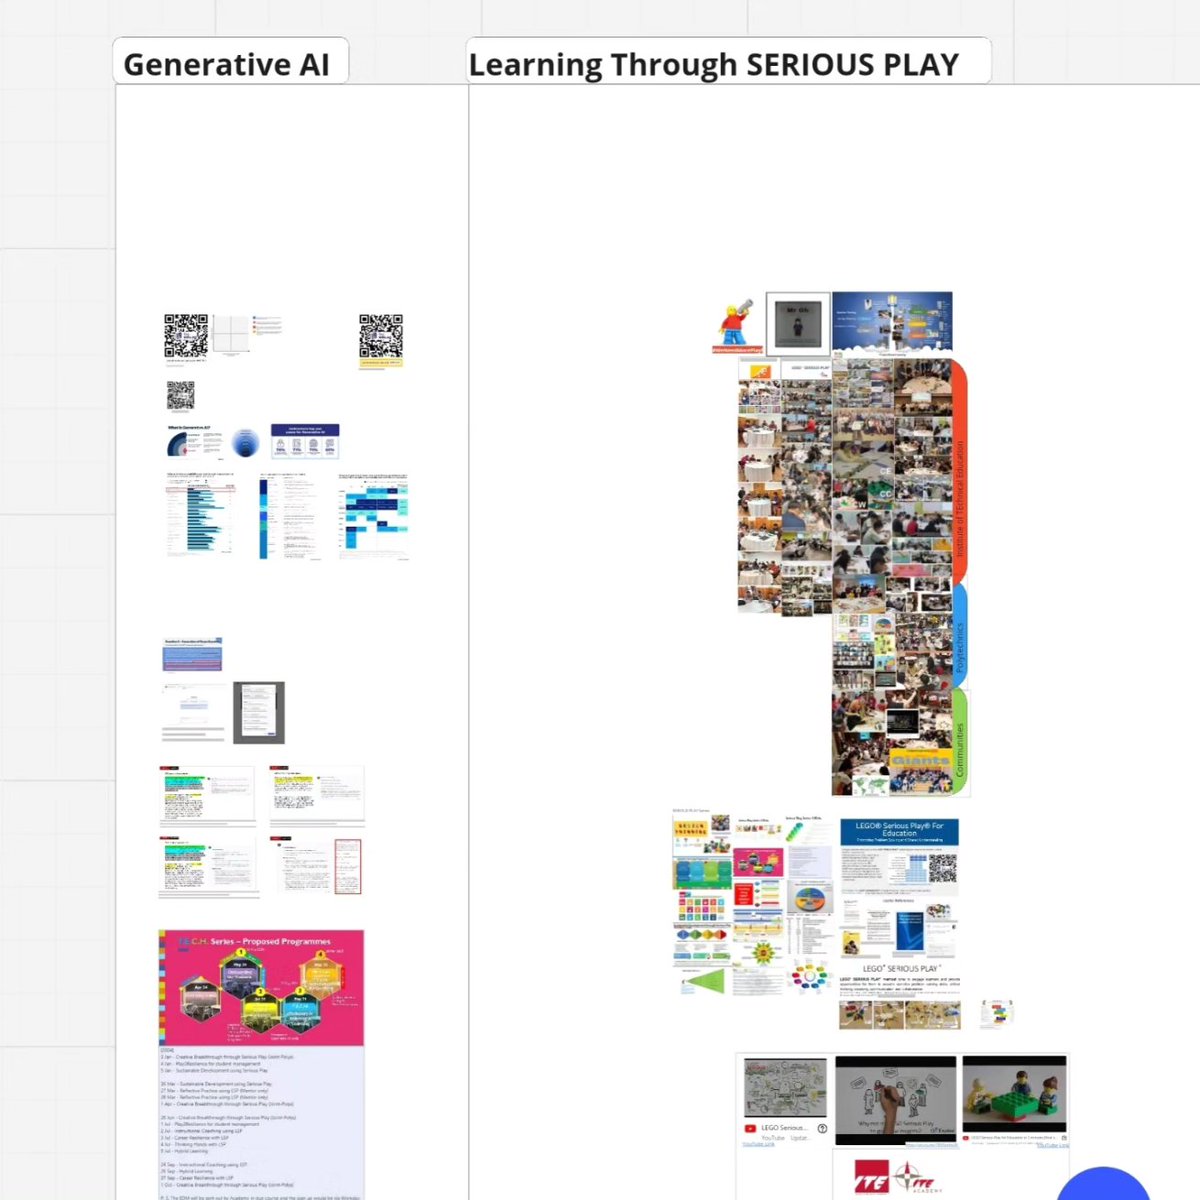 diving deep into the world of technology and creativity, and we've come up with some really neat ideas to spice up our lessons. By combining #GenerativeAI (that's fancy talk for smart computer stuff) with #LEGOSERIOUSPLAY, we're taking our teaching game to a whole new level!